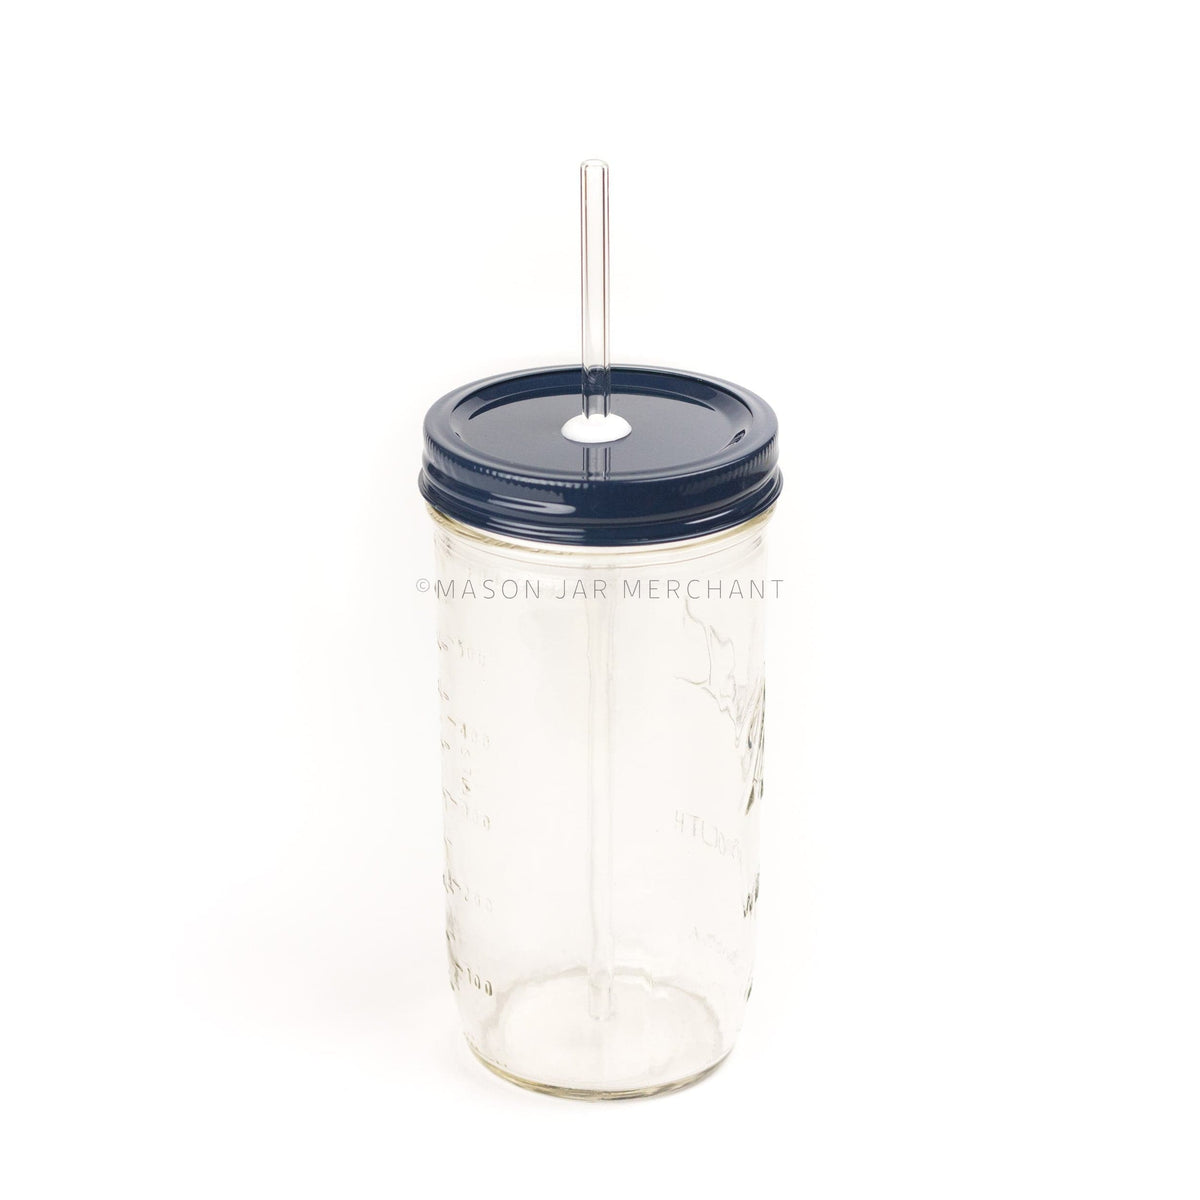 A 24 oz mason jar with a navy custom painted lid with a white silicone grommet and a glass straw, against a white backgroundClose-up of a 24 oz mason jar with a navy custom painted lid with a white silicone grommet and a glass straw, against a white background